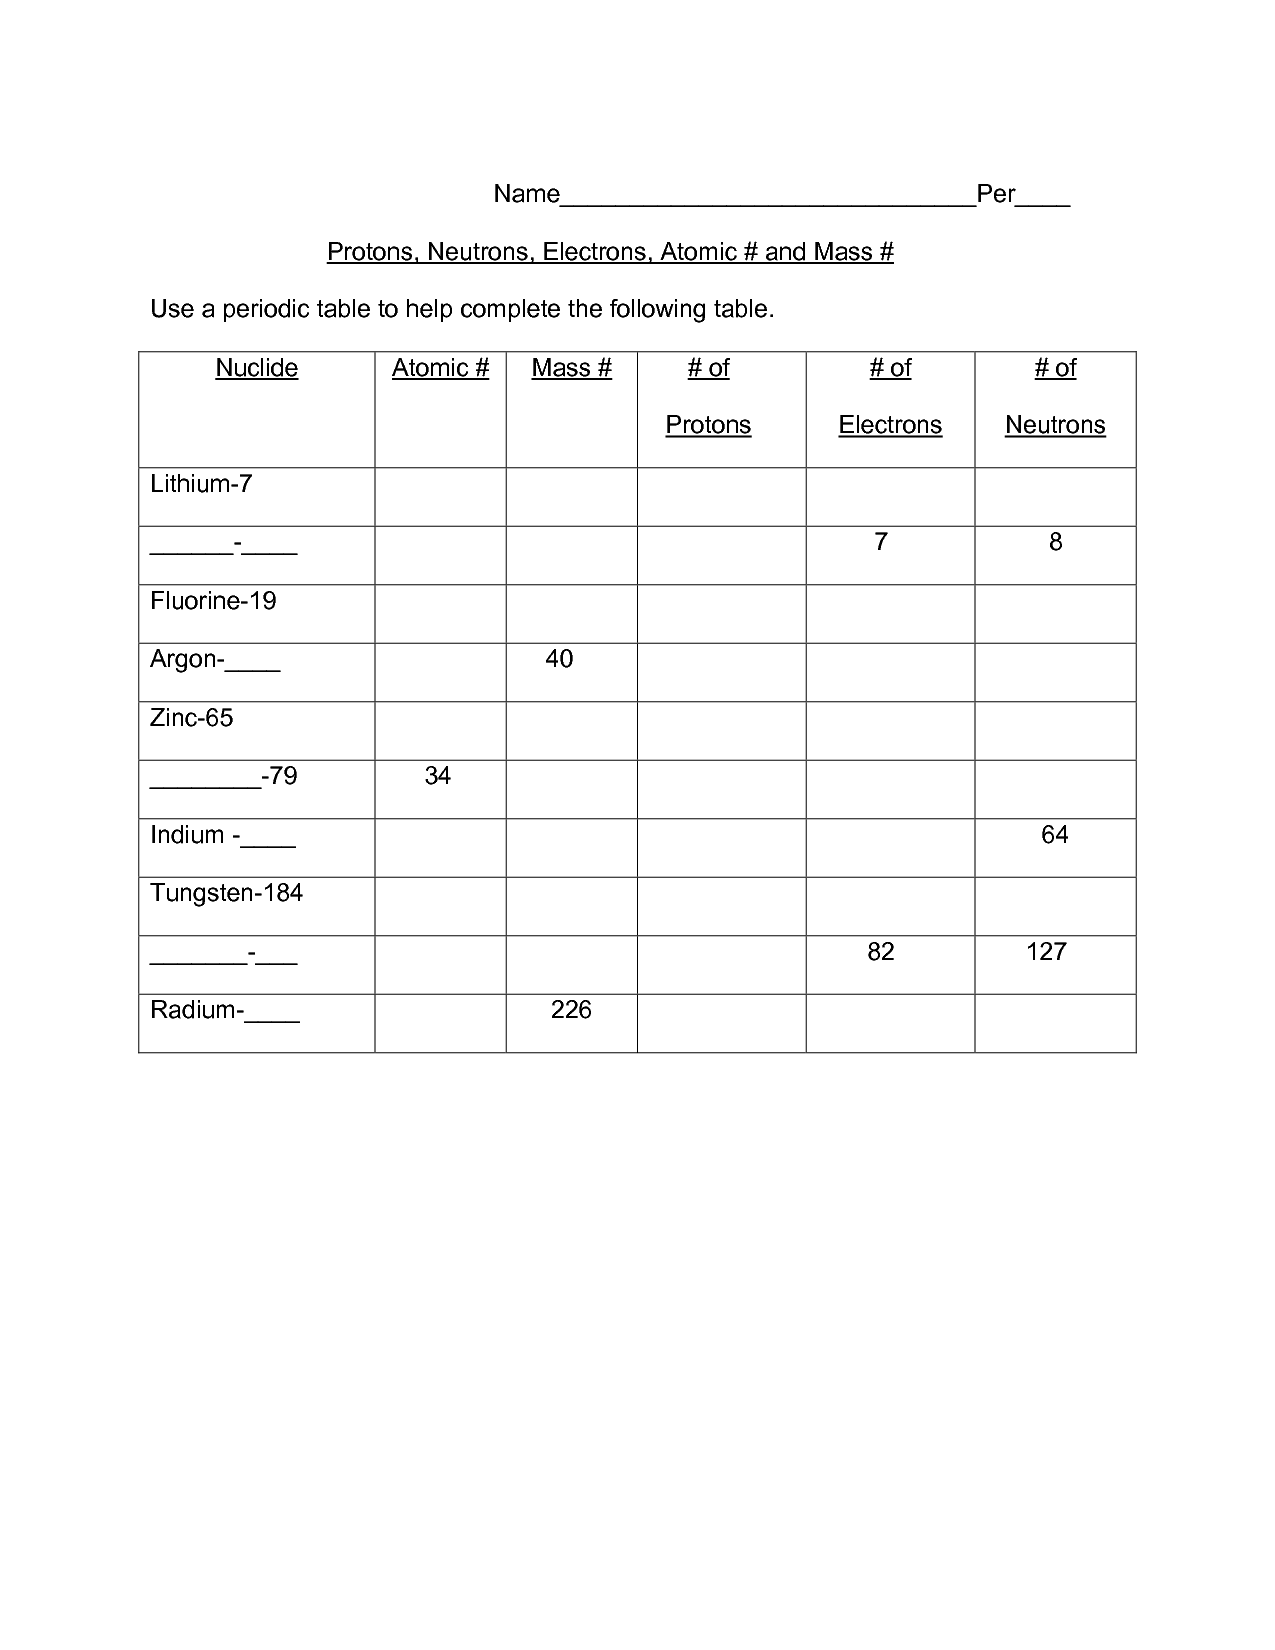 Protons Neutrons and Electrons Worksheet Image